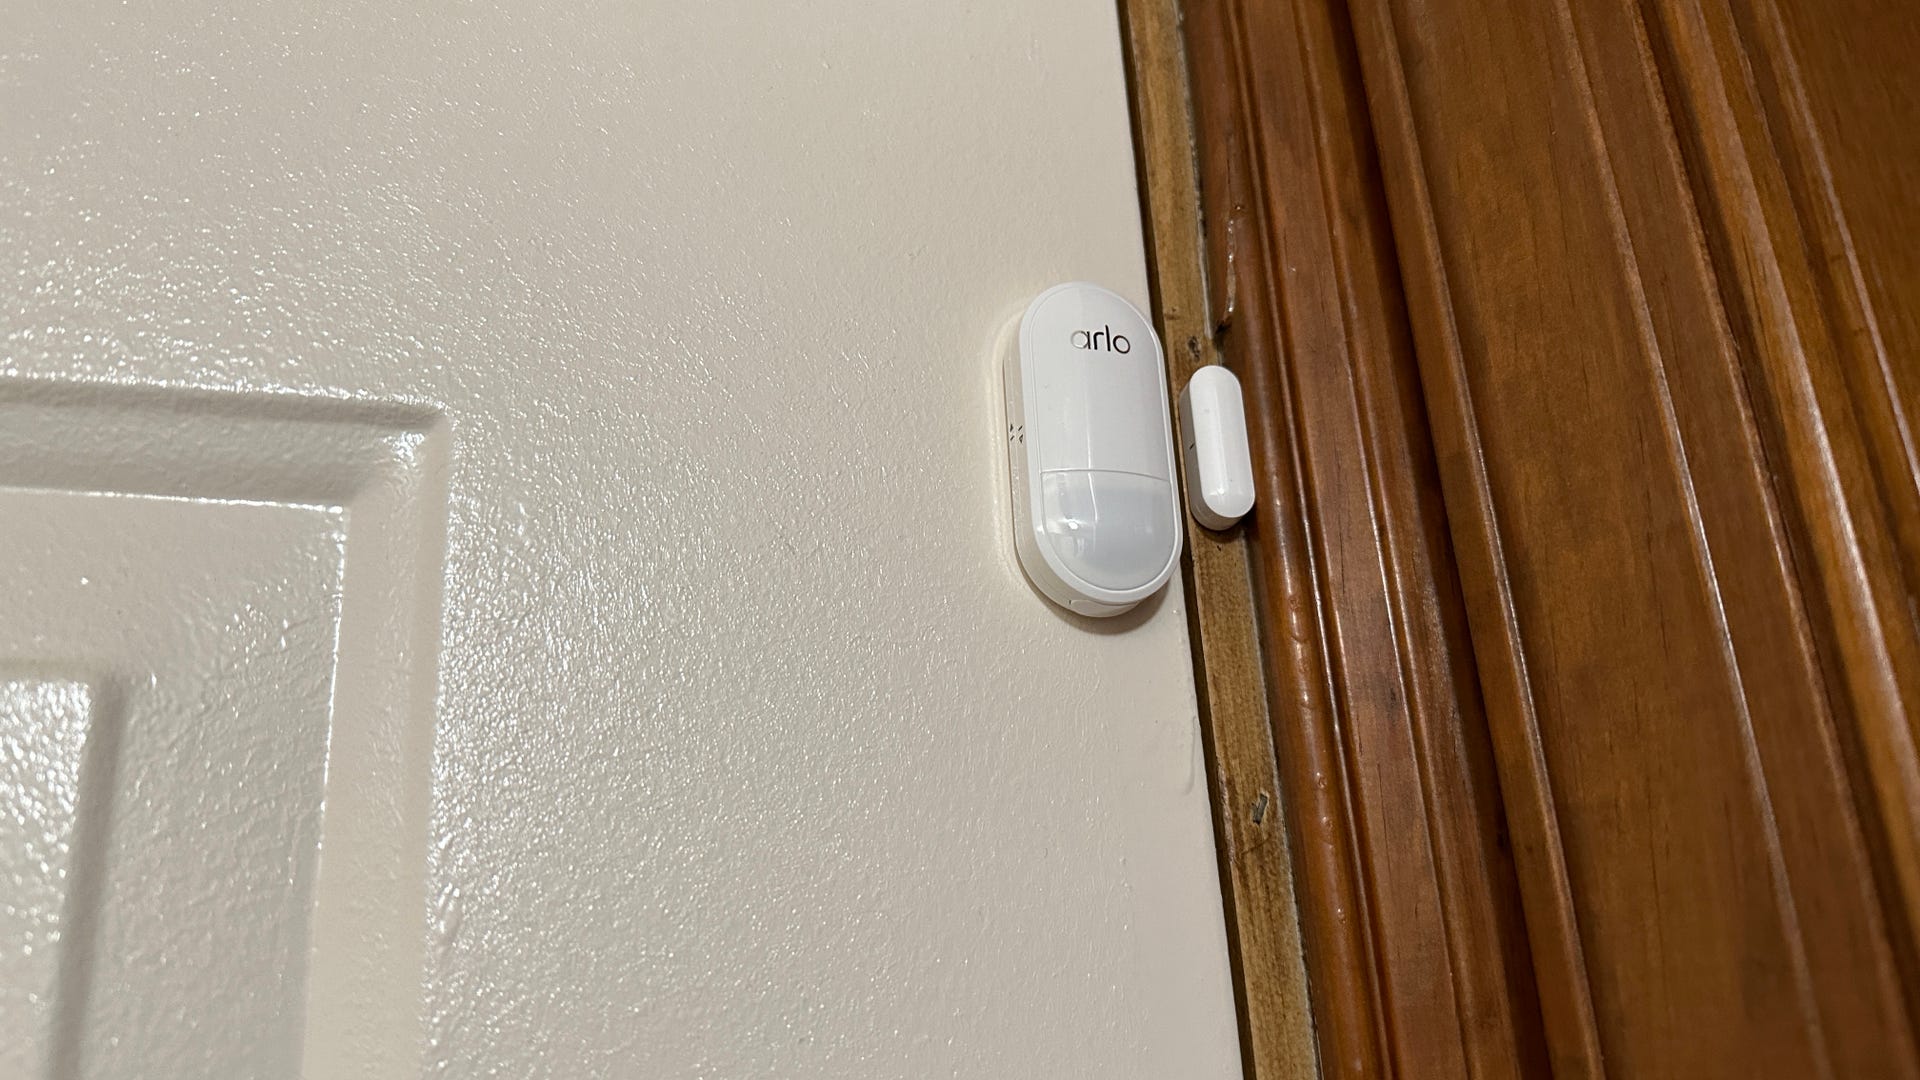 The Arlo Home Security System's multi-sensor mounted on a door frame to track comings and goings.